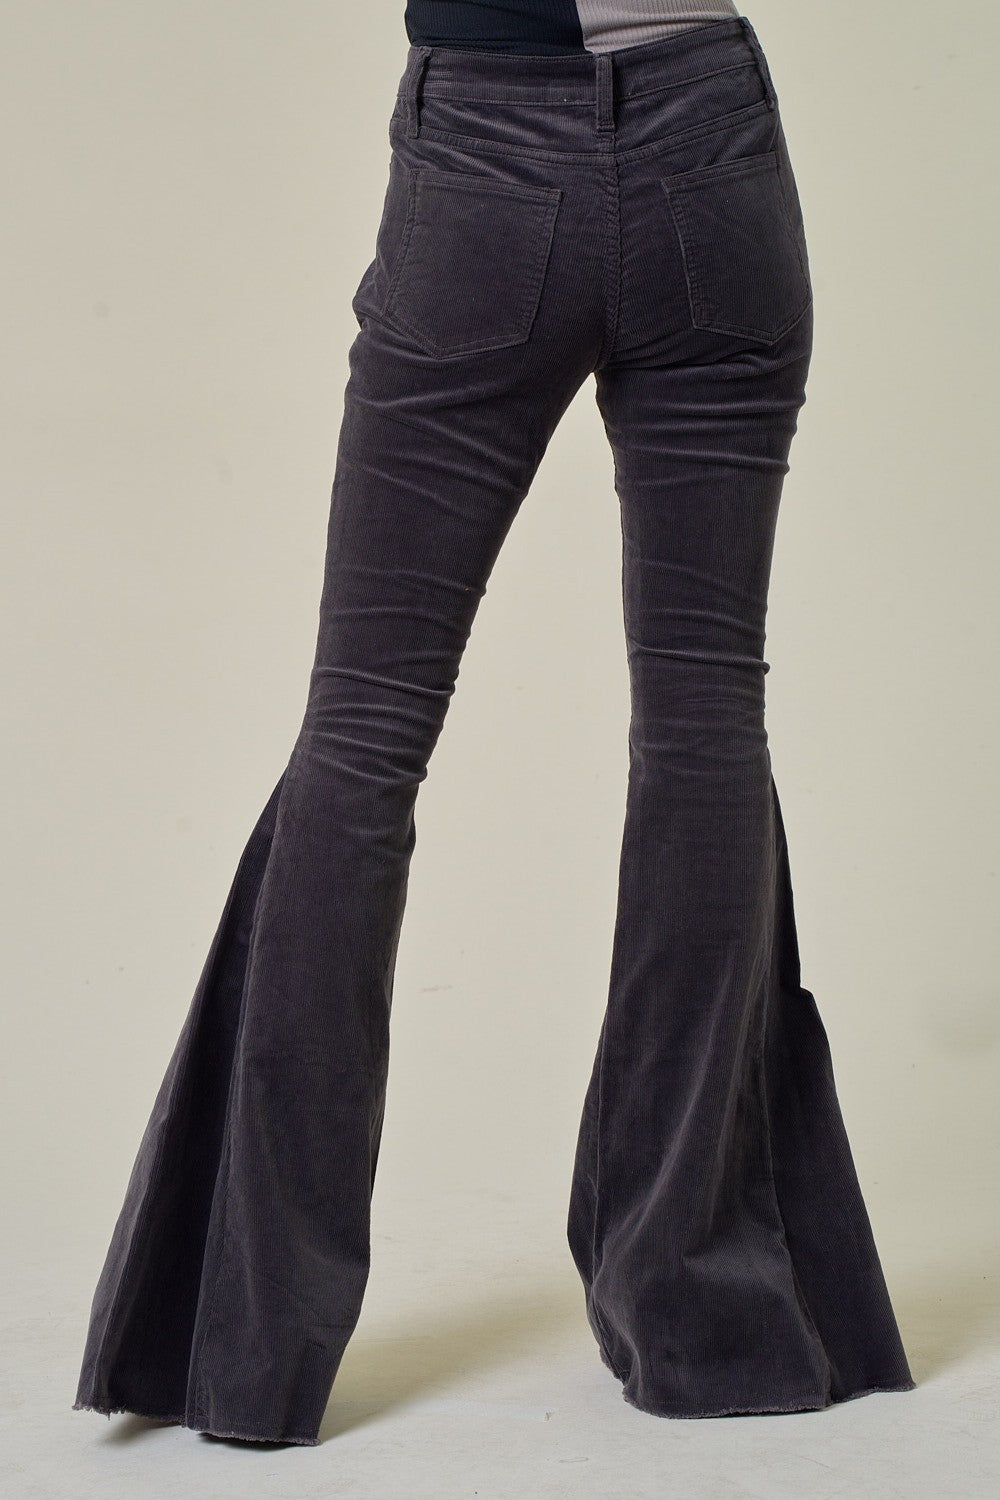 CORDUROY FLARED PANTS WITH DISTRESSED HEM